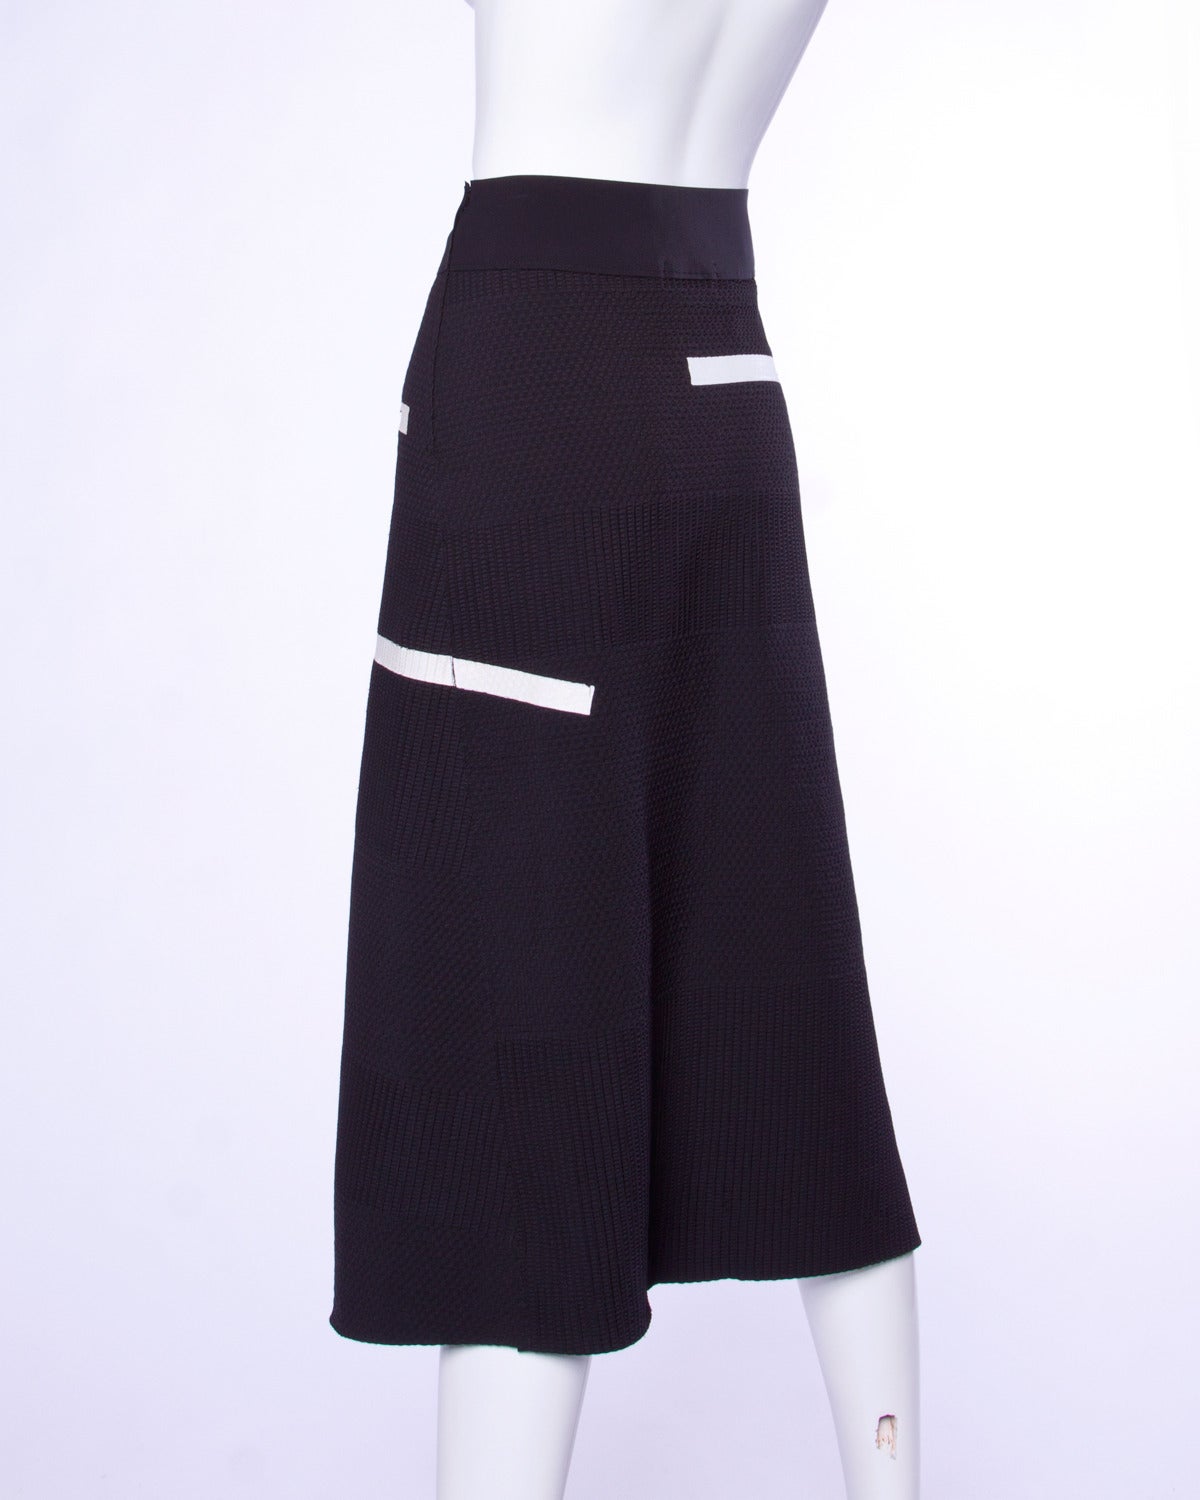 Unique black and white skirt by Marithe + Francois Girbaud with a decorative belly button ring detail on the waistband. Asymmetric white slash pocket.

Details:

Unlined
Side Zip and Hook Closure
Marked Size: US 27/ D 36
Color: Black/